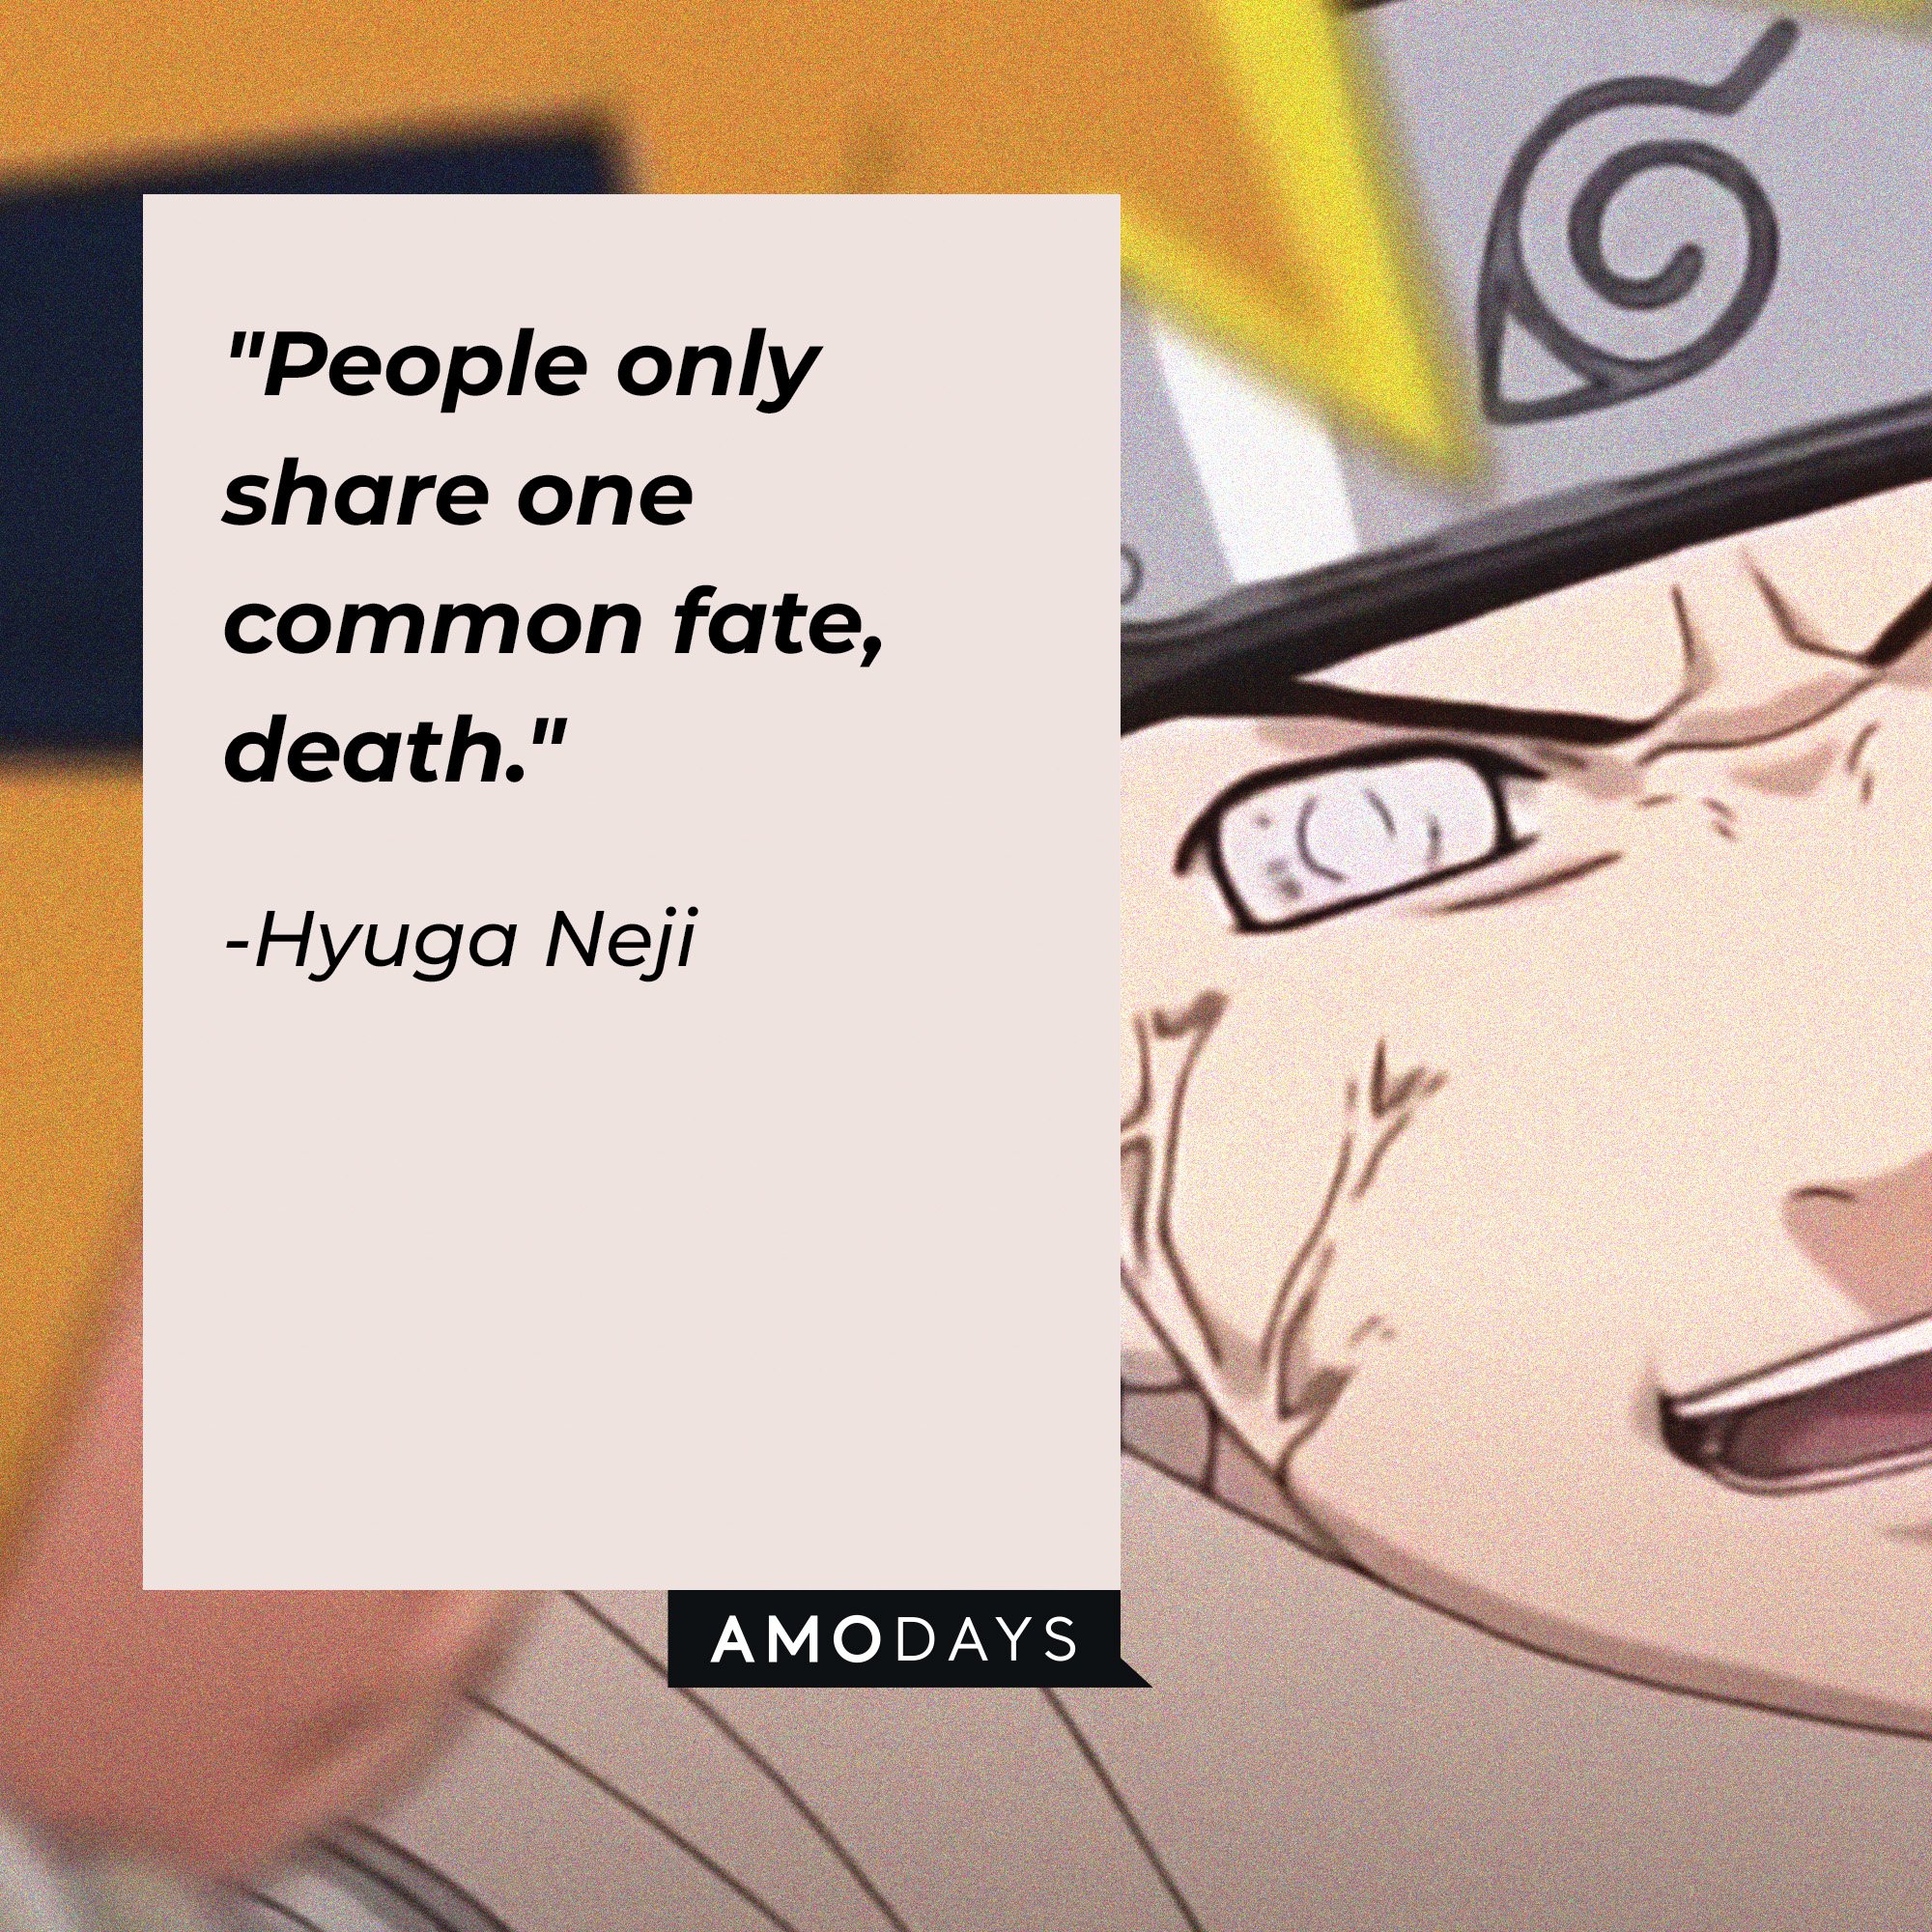 Hyuga Neji's quote: "People only share one common fate, death." | Image: AmoDays